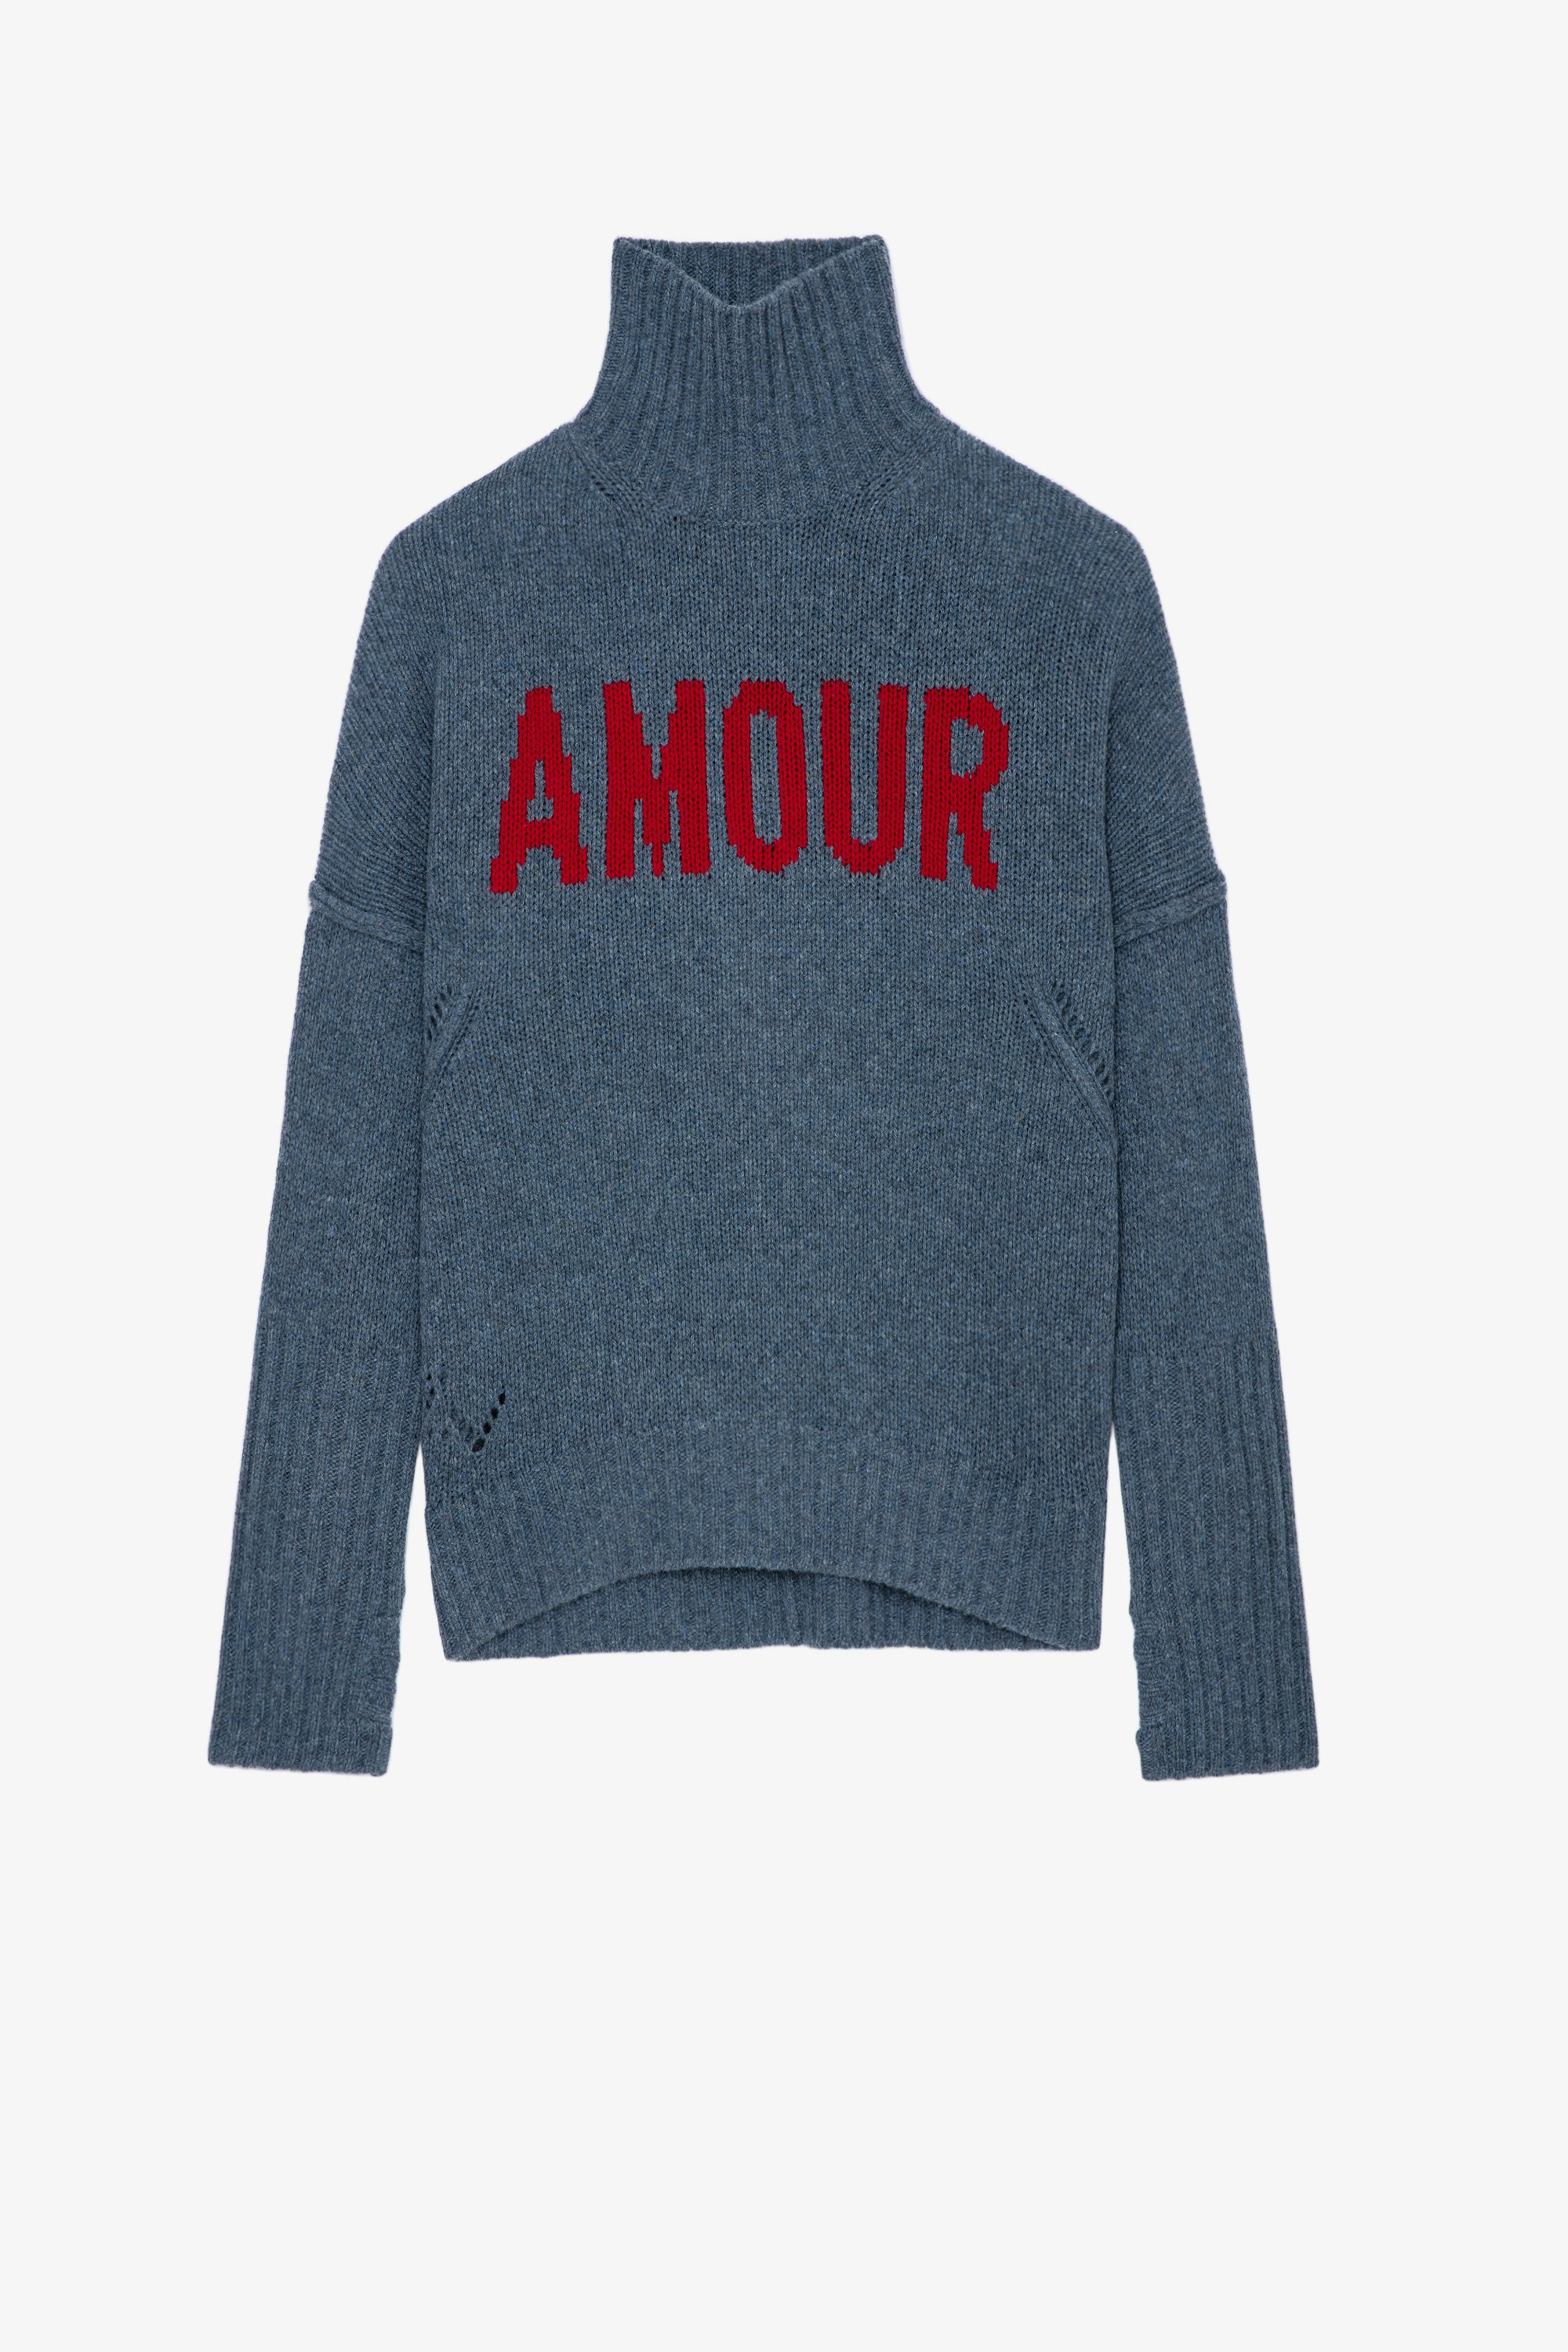 Alma We Amour ニット Women’s blue knit turtleneck jumper with contrasting “Amour” slogan 